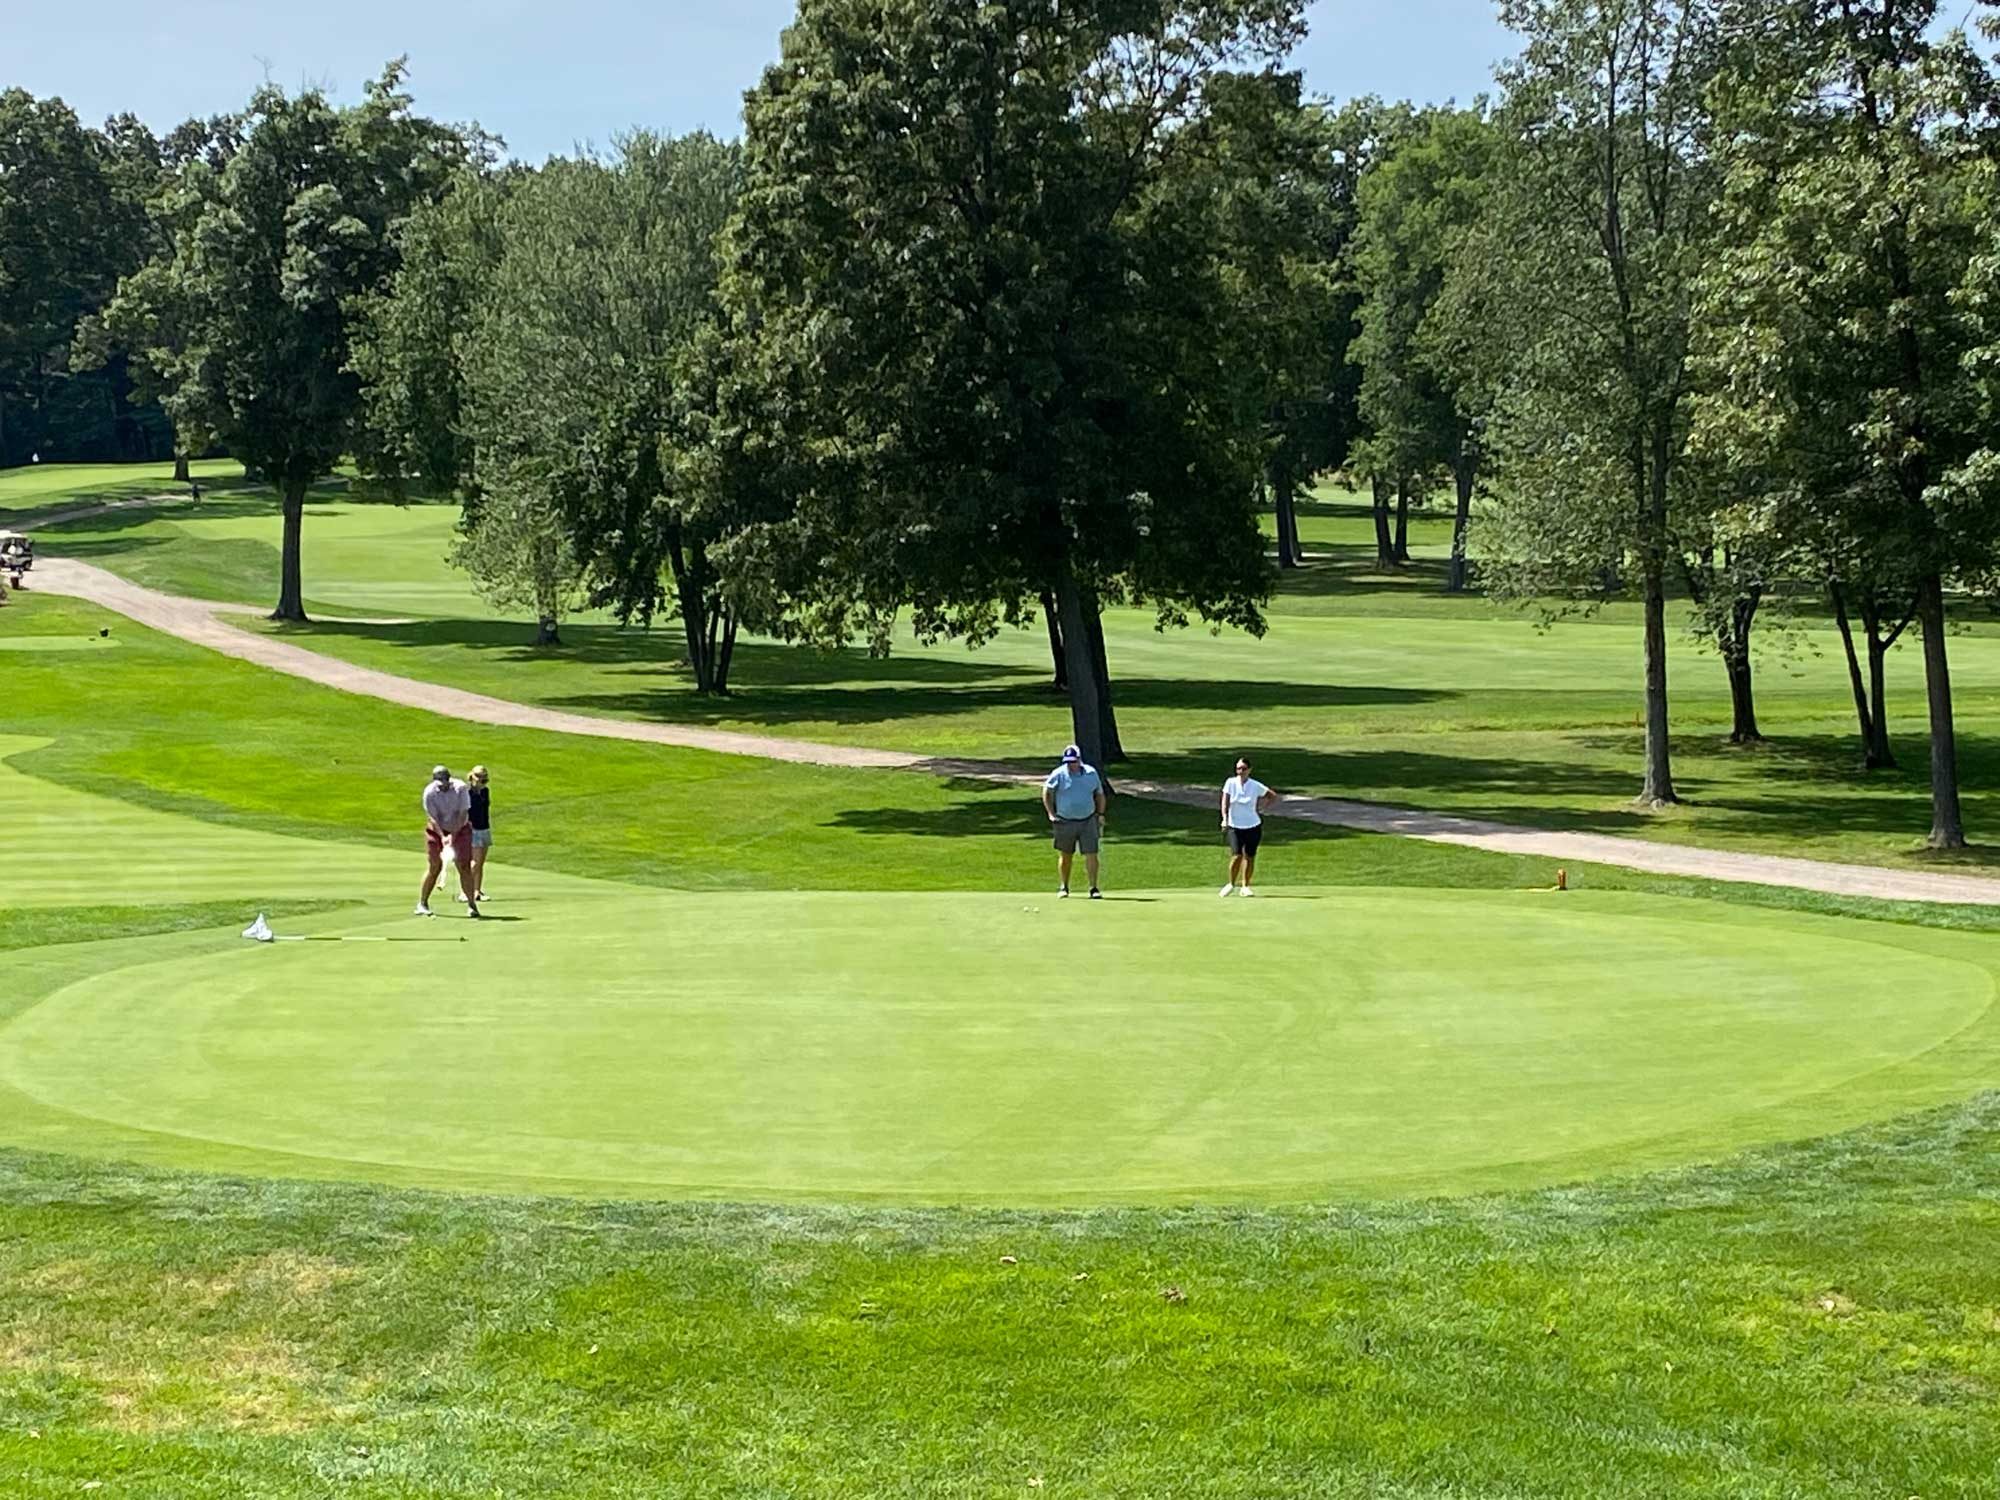 Golfers on the green, putting, at the Frankel Kinsler Tournament